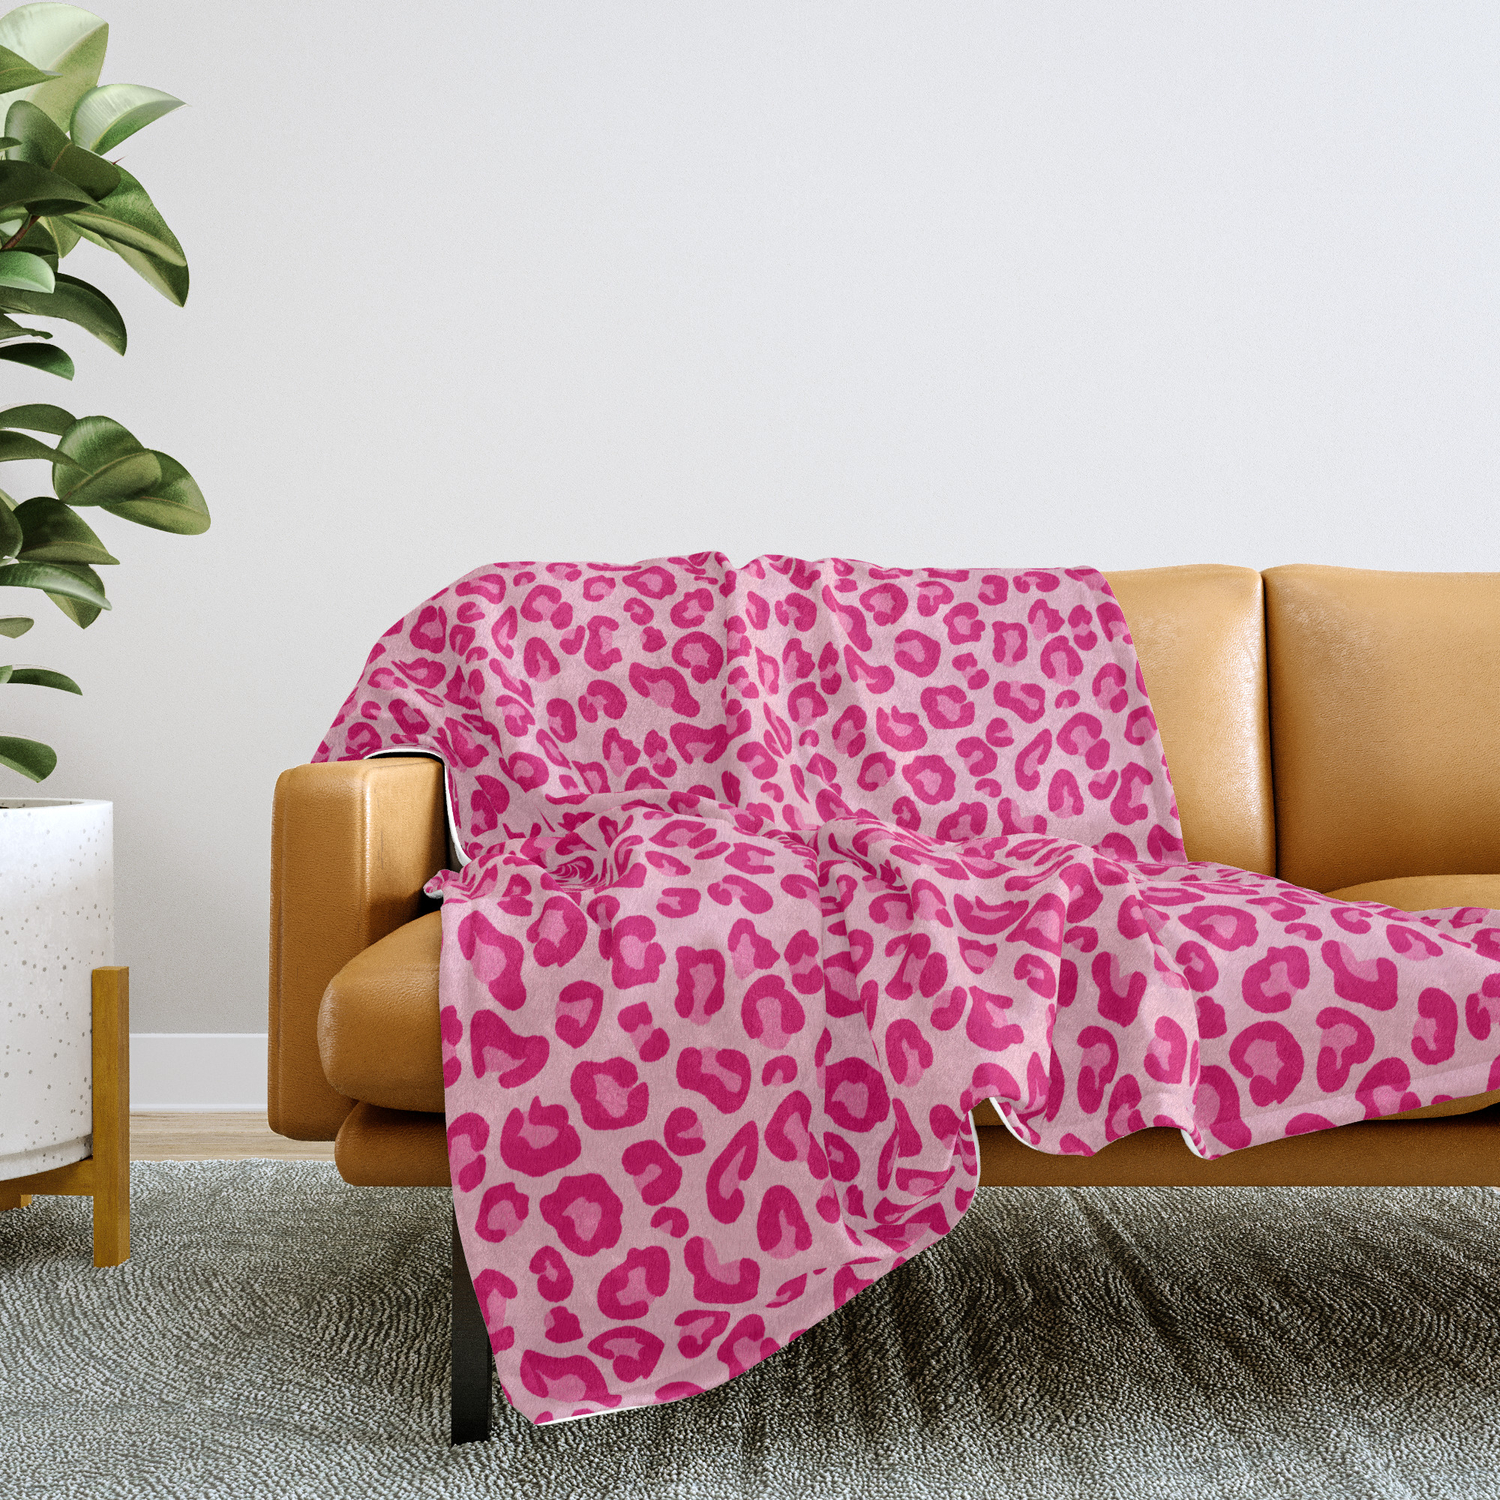 Leopard Print in Pastel Pink, Hot Pink and Fuchsia Throw Blanket by mm  gladden | Society6